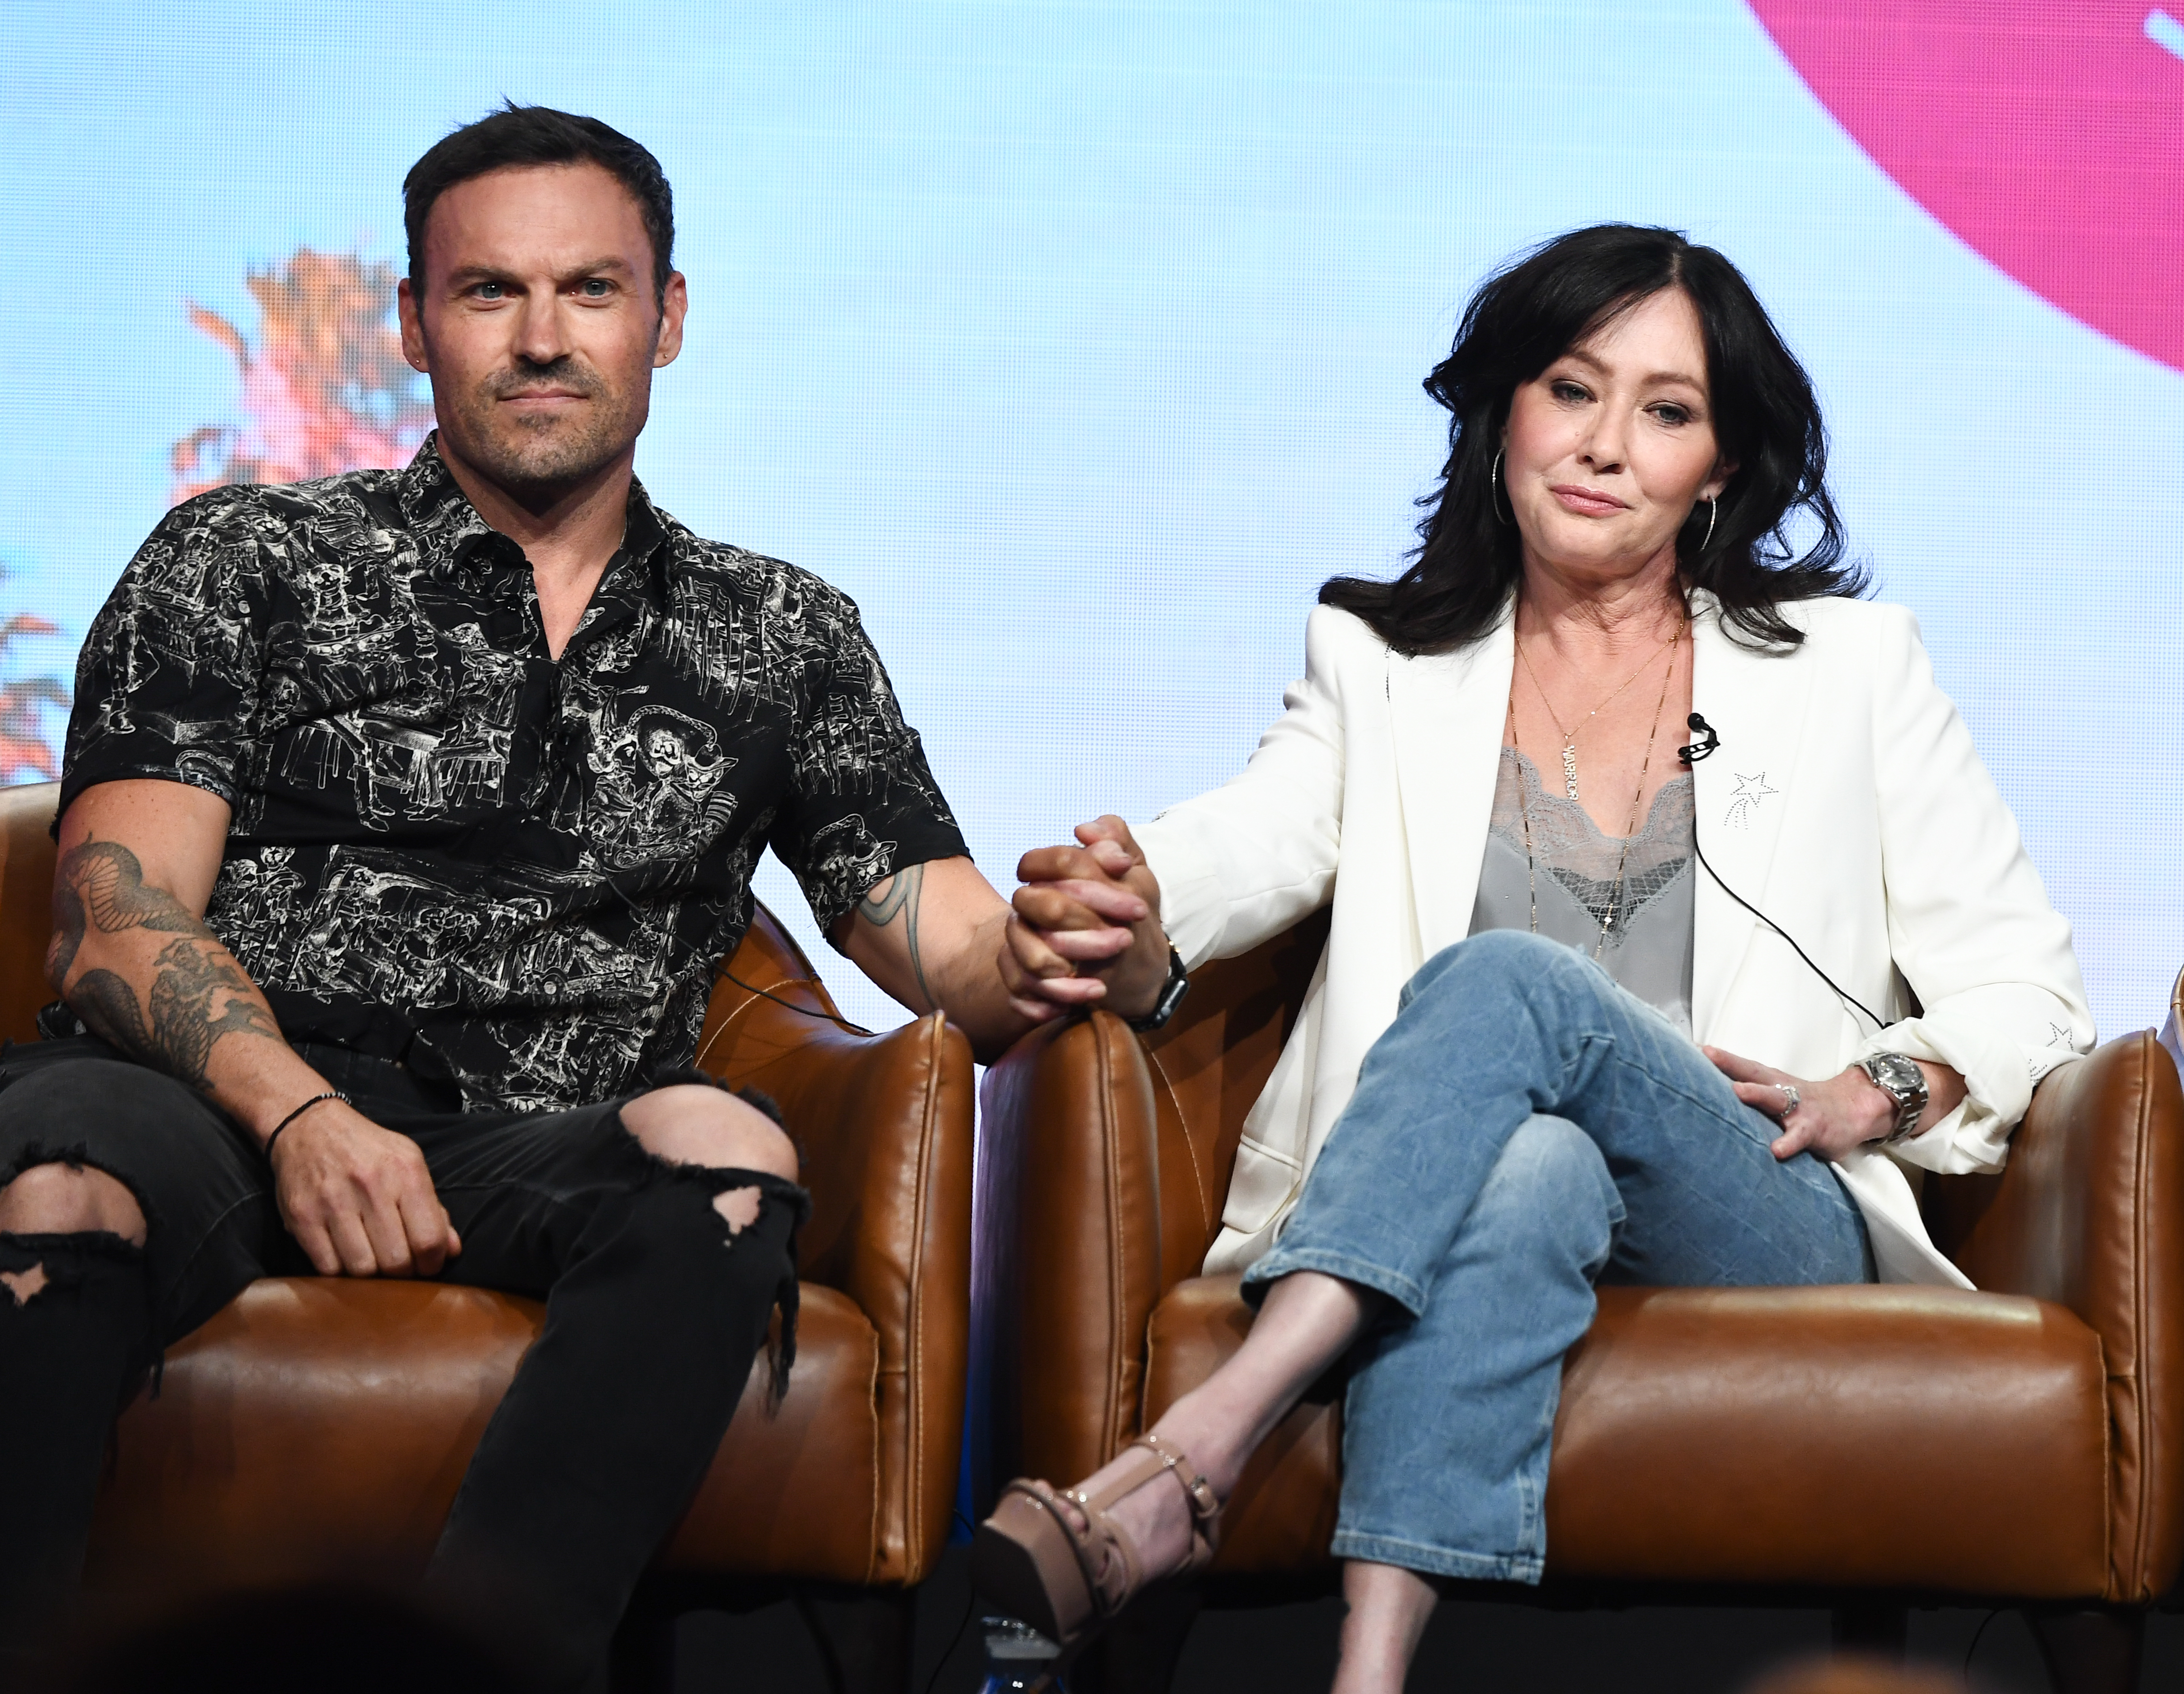 Brian Austin Green and Shannen Doherty at the FX Networks "BH90210" TV show panel during the TCA Summer Press Tour in Los Angeles, USA on August 7, 2019 | Source: Getty Images